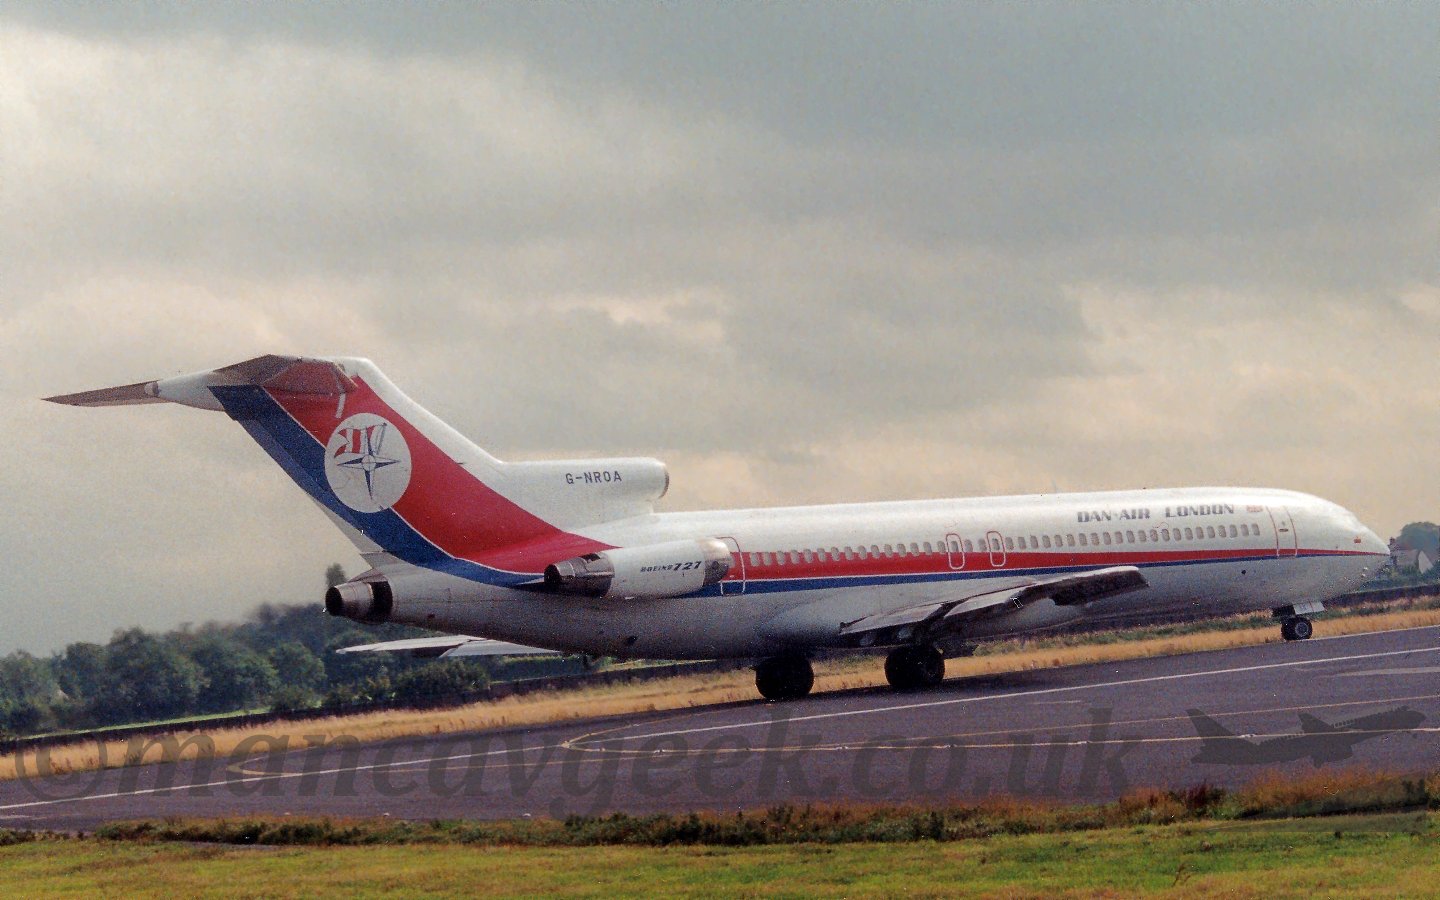 Side view of a white, red, and blue, 3 engined jet airliner with the engines mounted on the rear fuselage, turning on to the runway for take off, under ominous grey clouds.